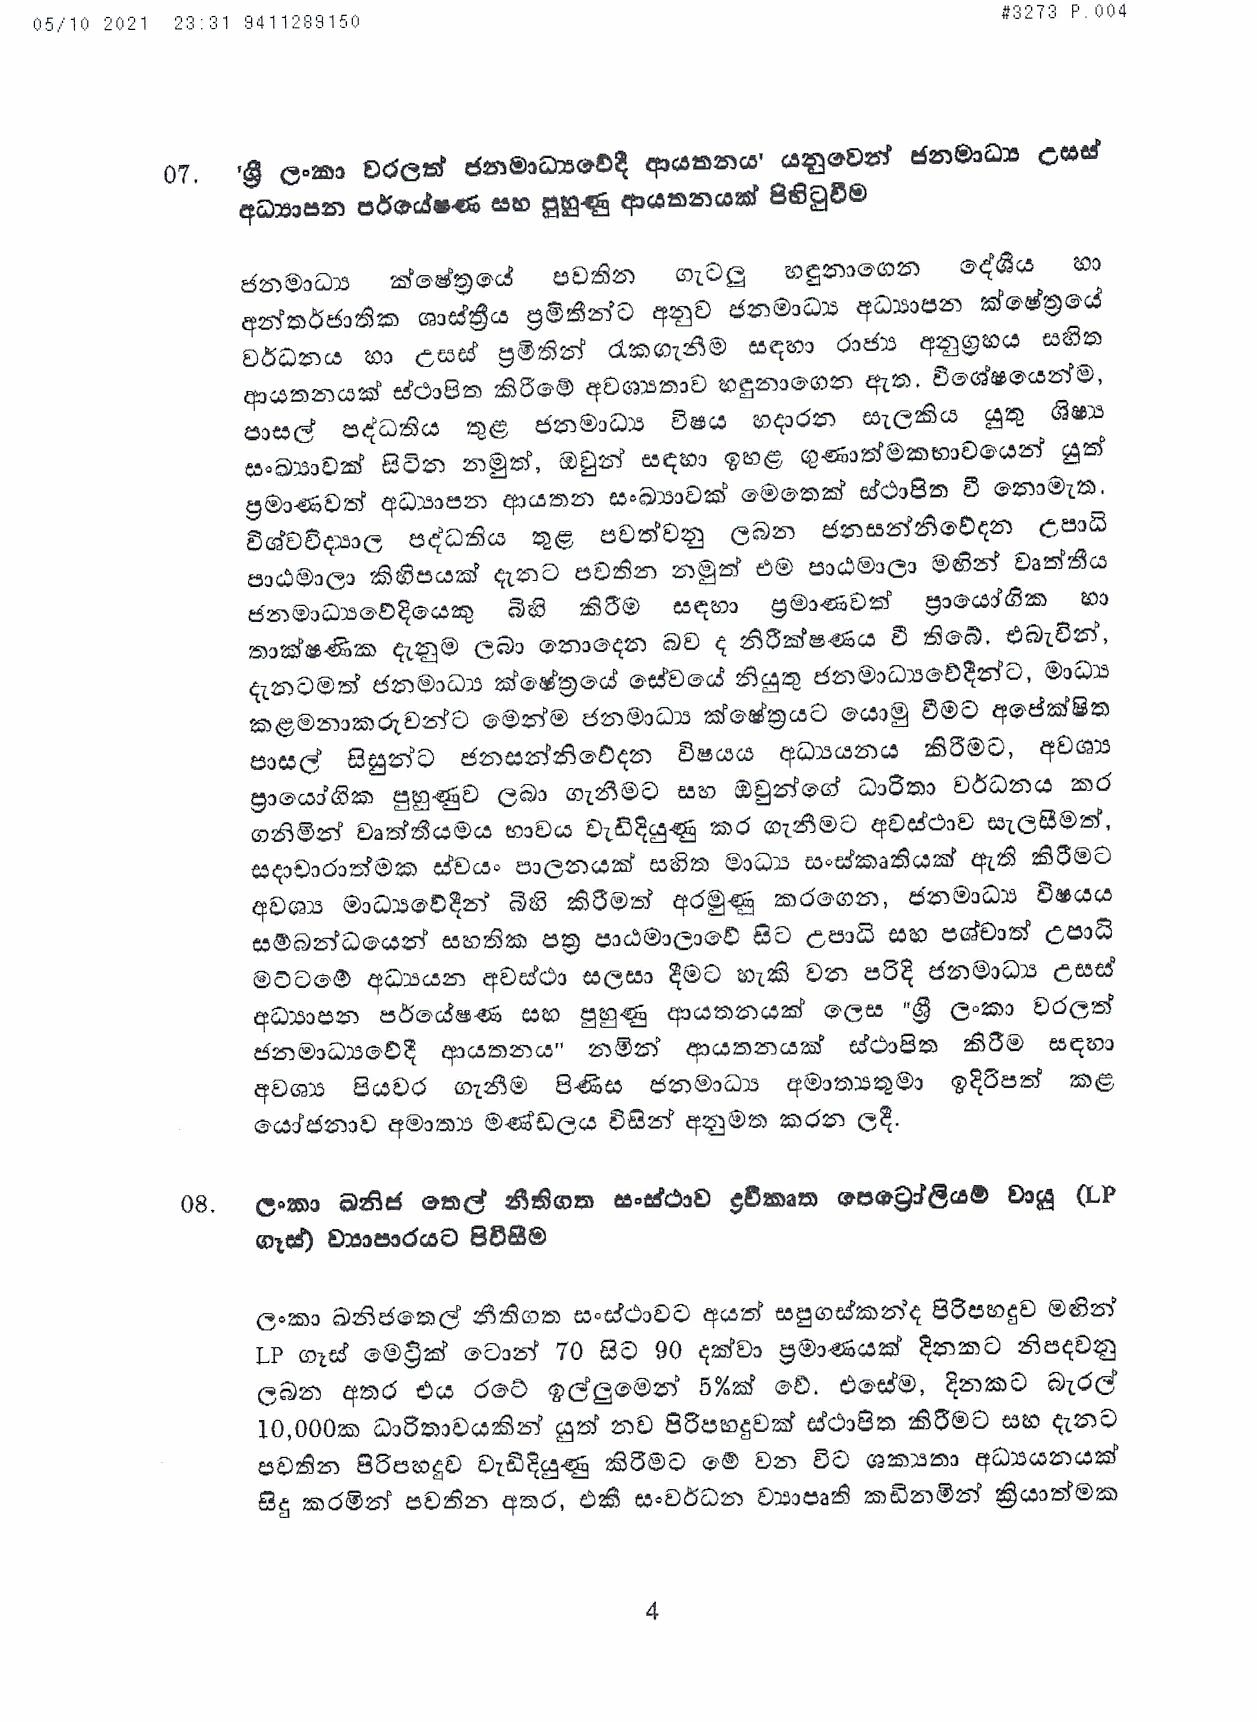 Cabinet Decision on 05.10.2021 page 004